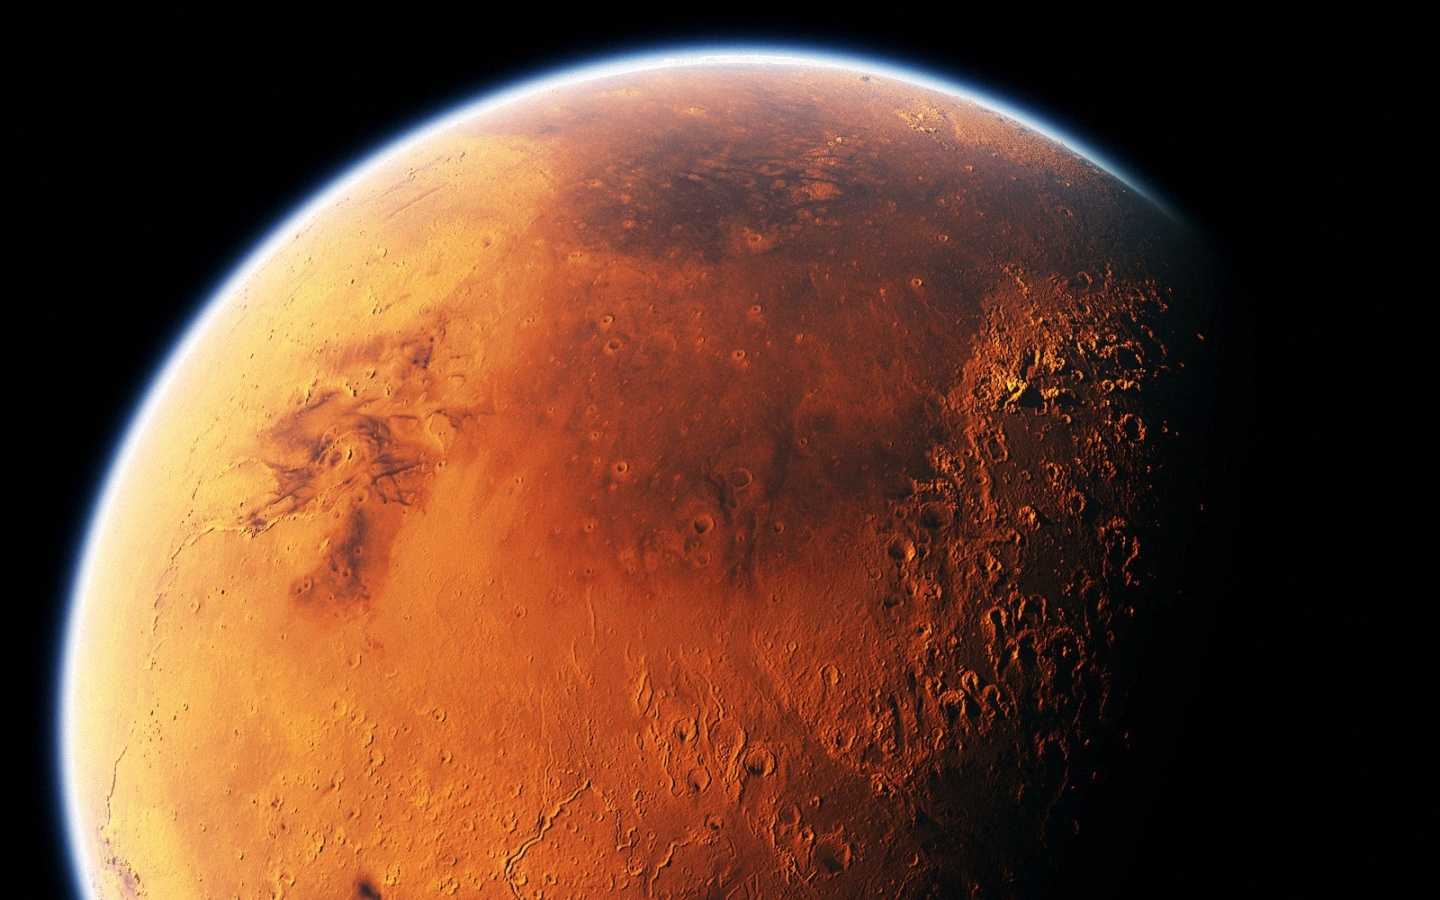 The axis of rotation of Mars was tilted more than now. Earth